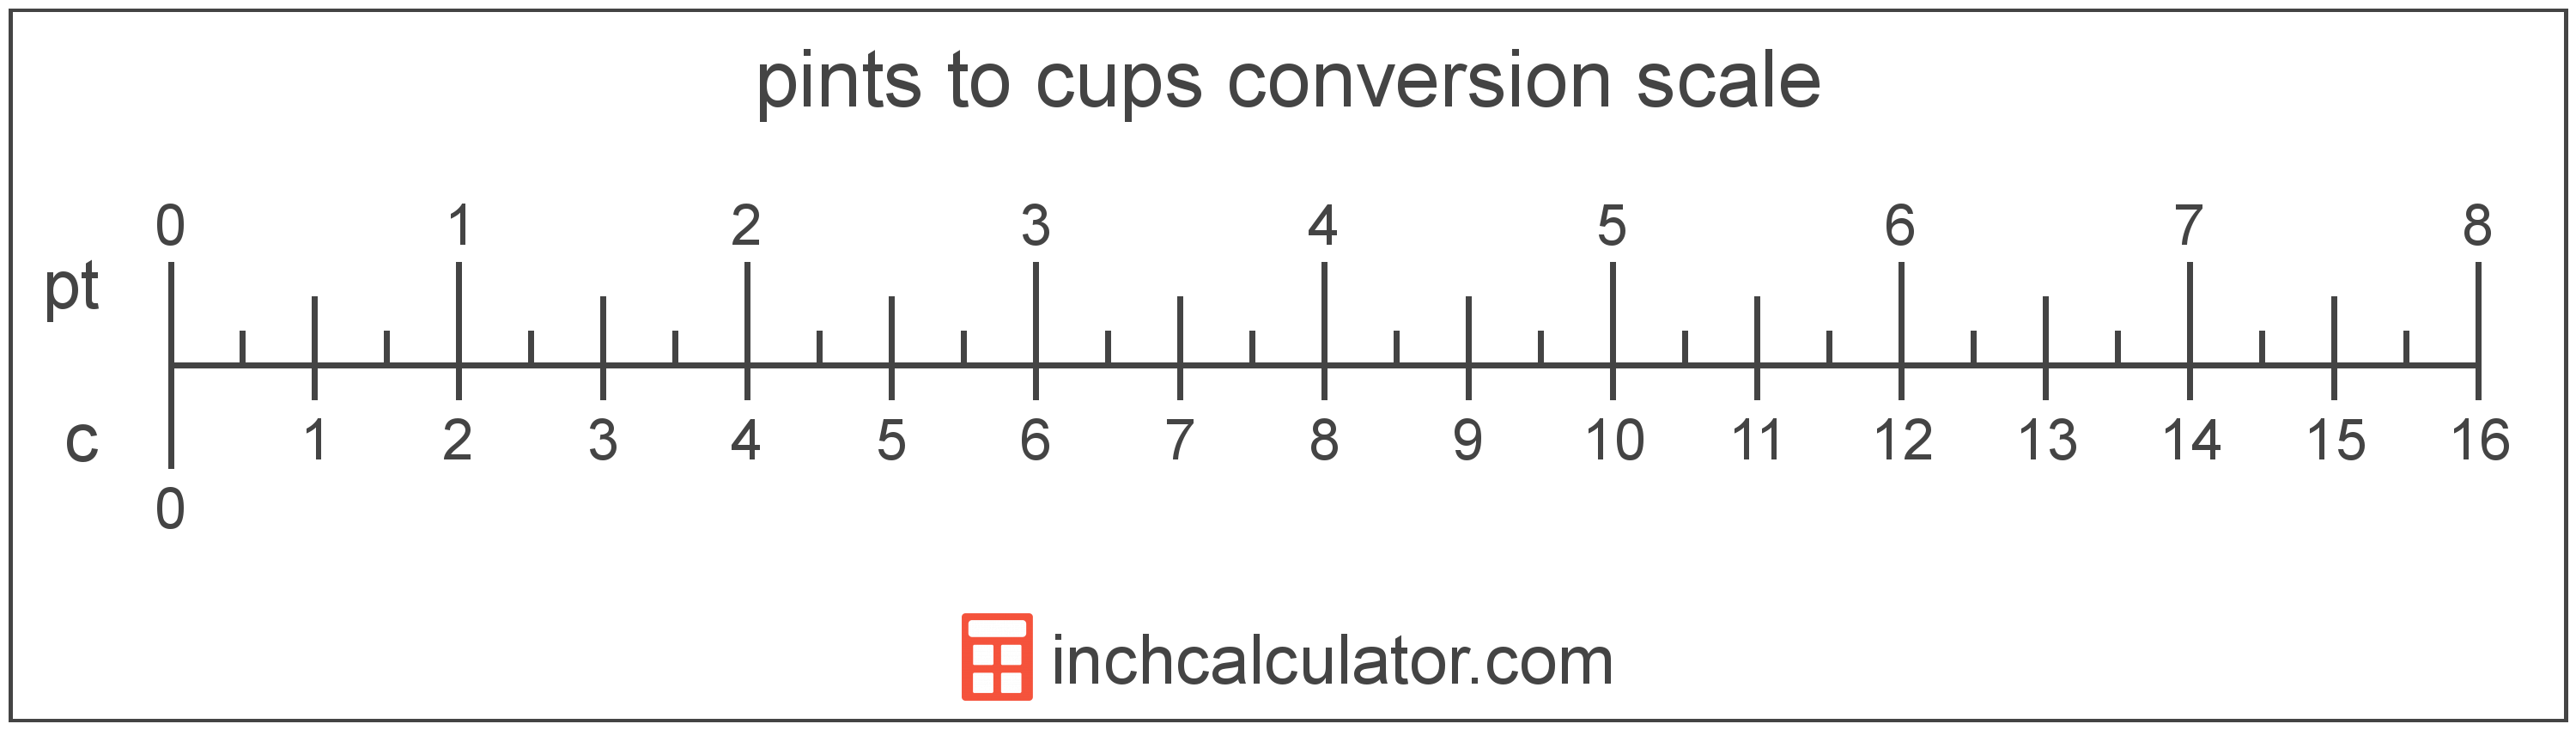 conversion scale showing pints and equivalent cups volume values